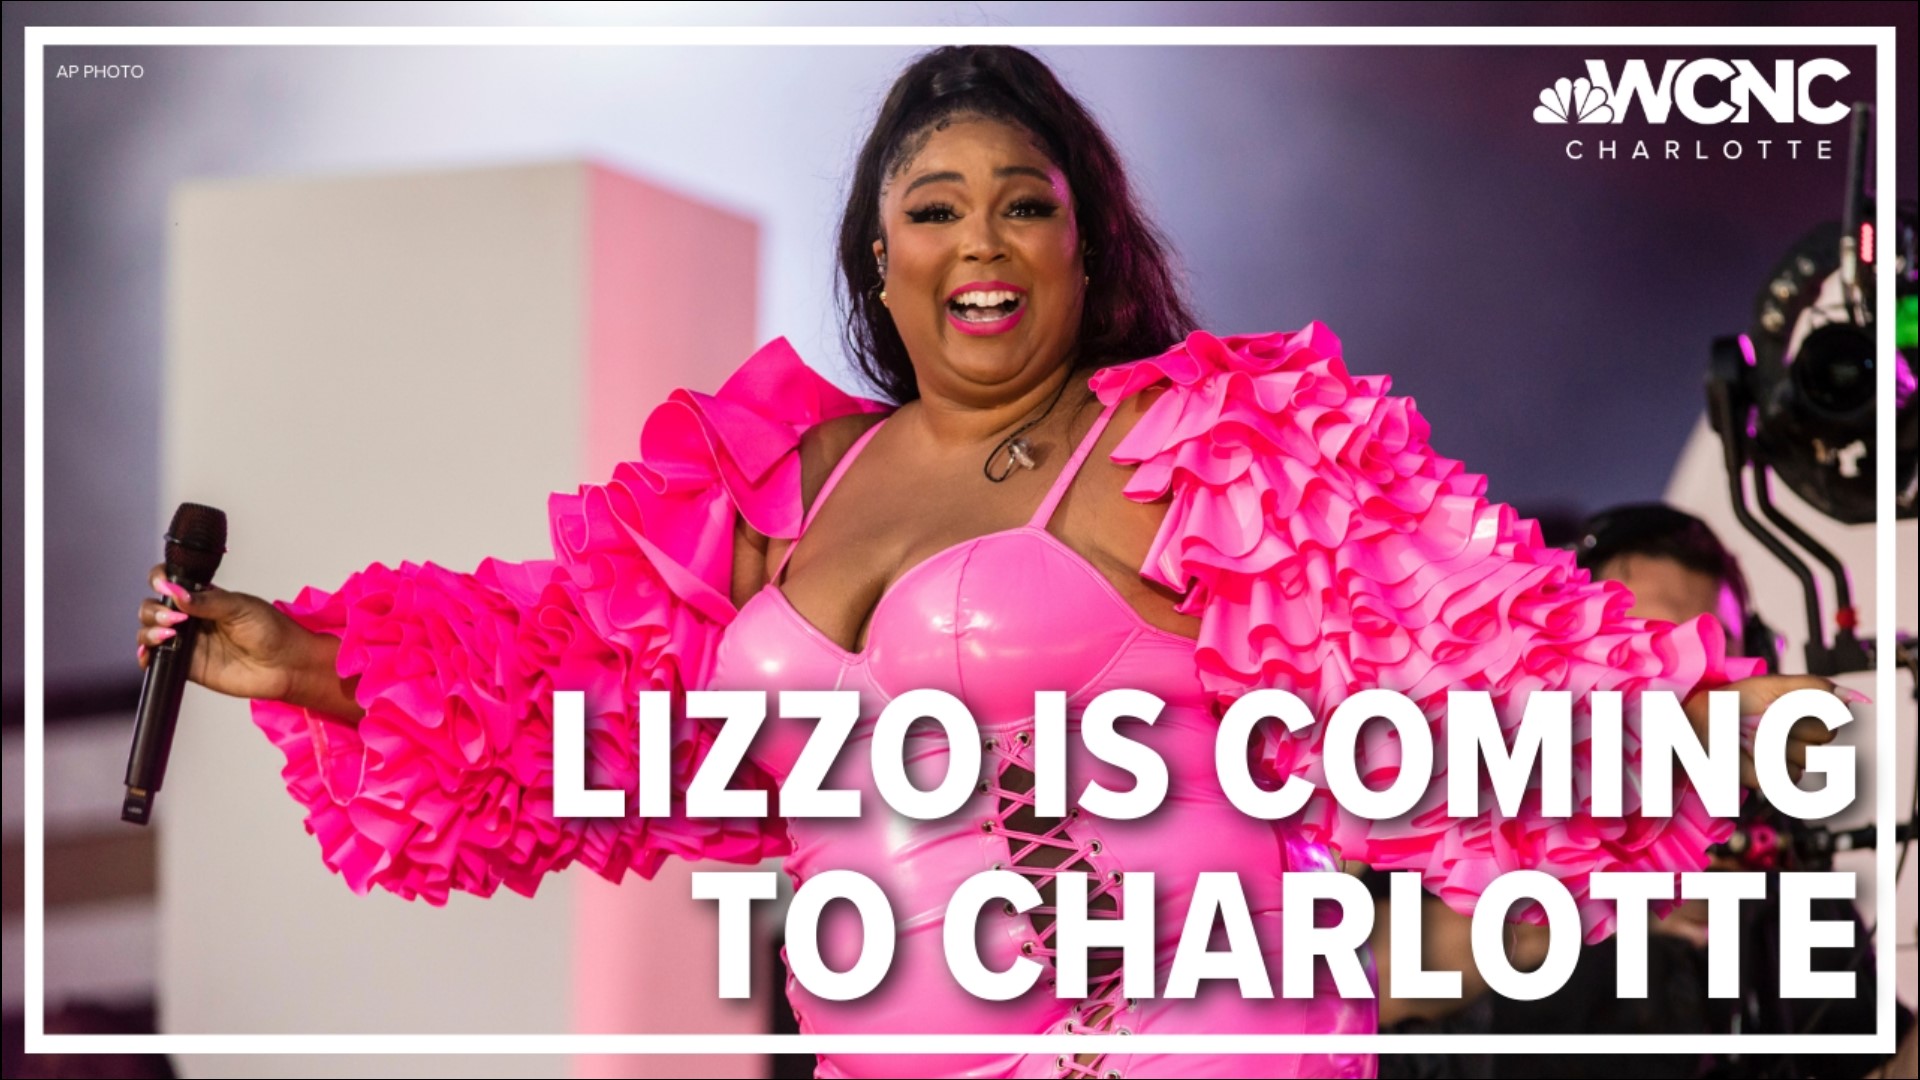 Lizzo will be performing at the Spectrum Center in October.